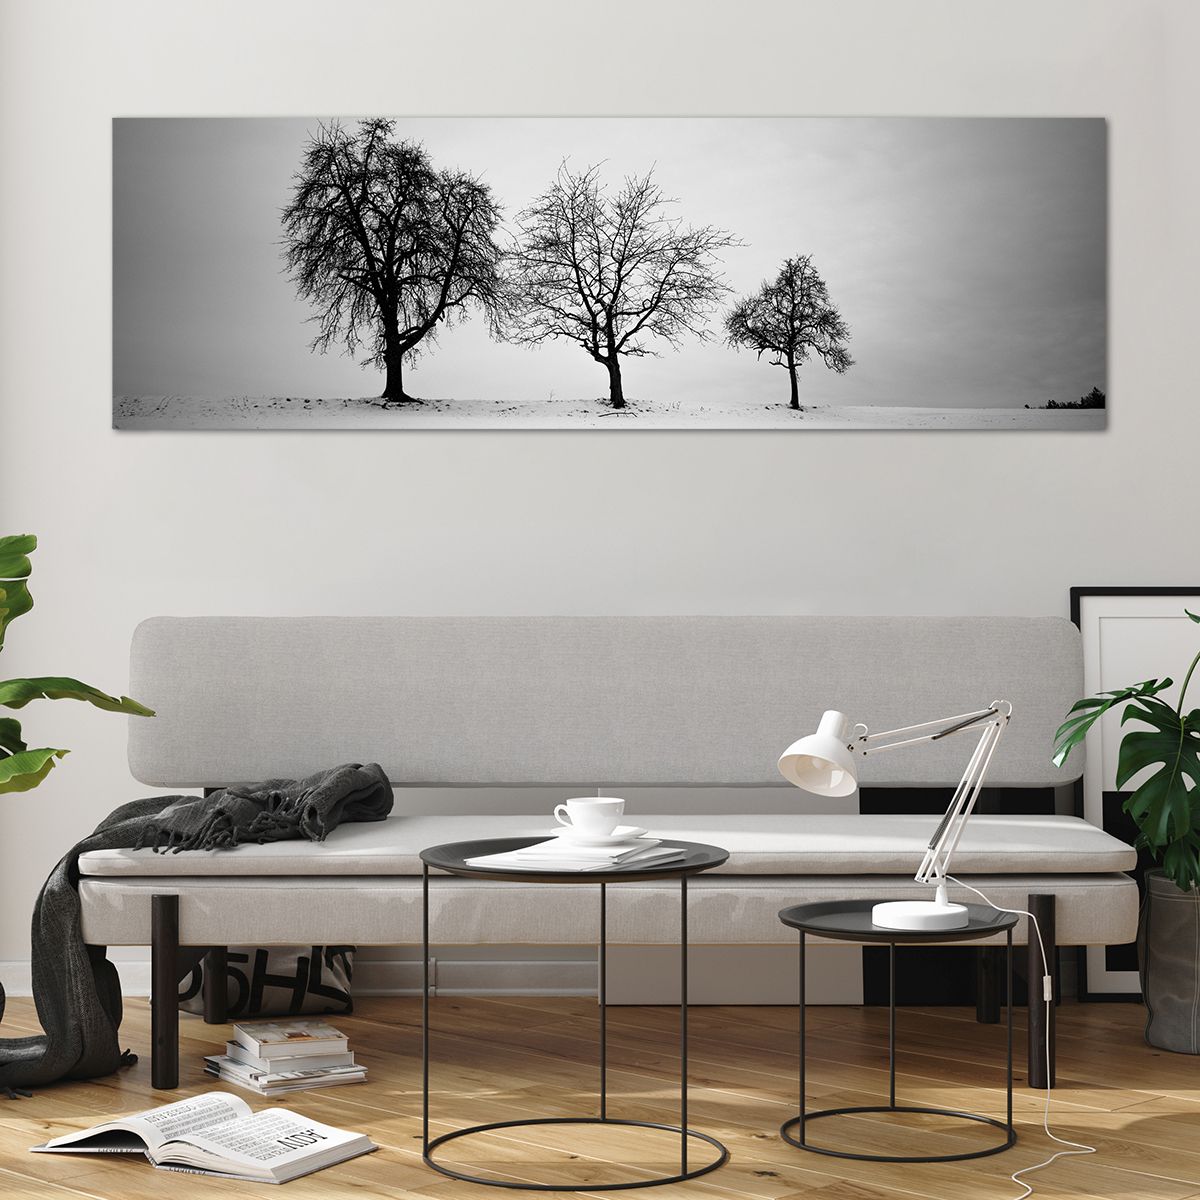 Glass picture  Landscape, Glass picture  Trees, Glass picture  Winter, Glass picture  Nature, Glass picture  Black And White